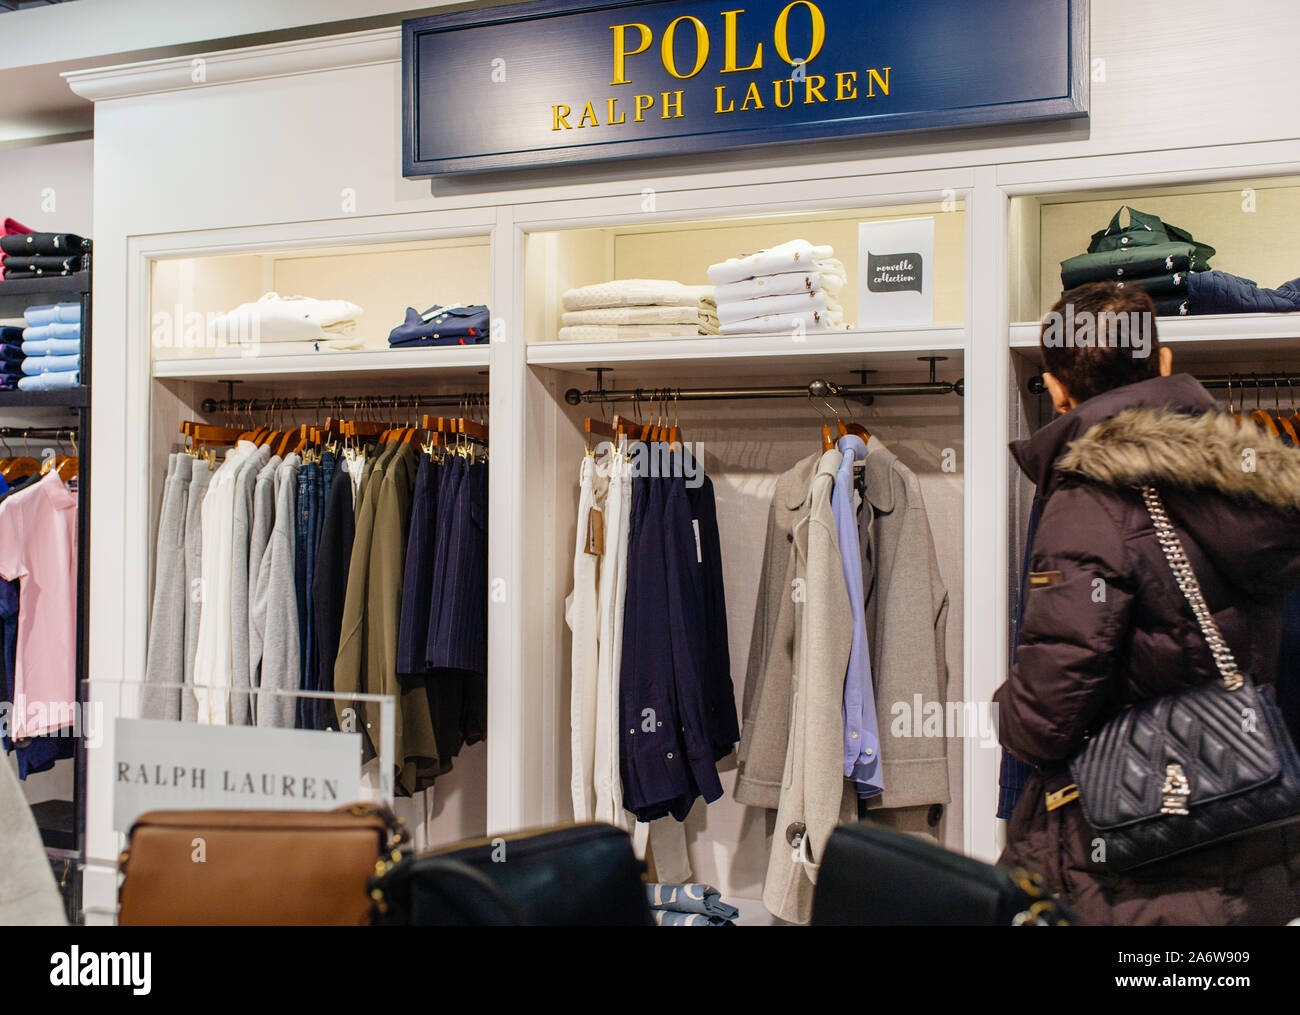 Page 2 - Polo Ralph Lauren High Resolution Stock Photography and Images -  Alamy